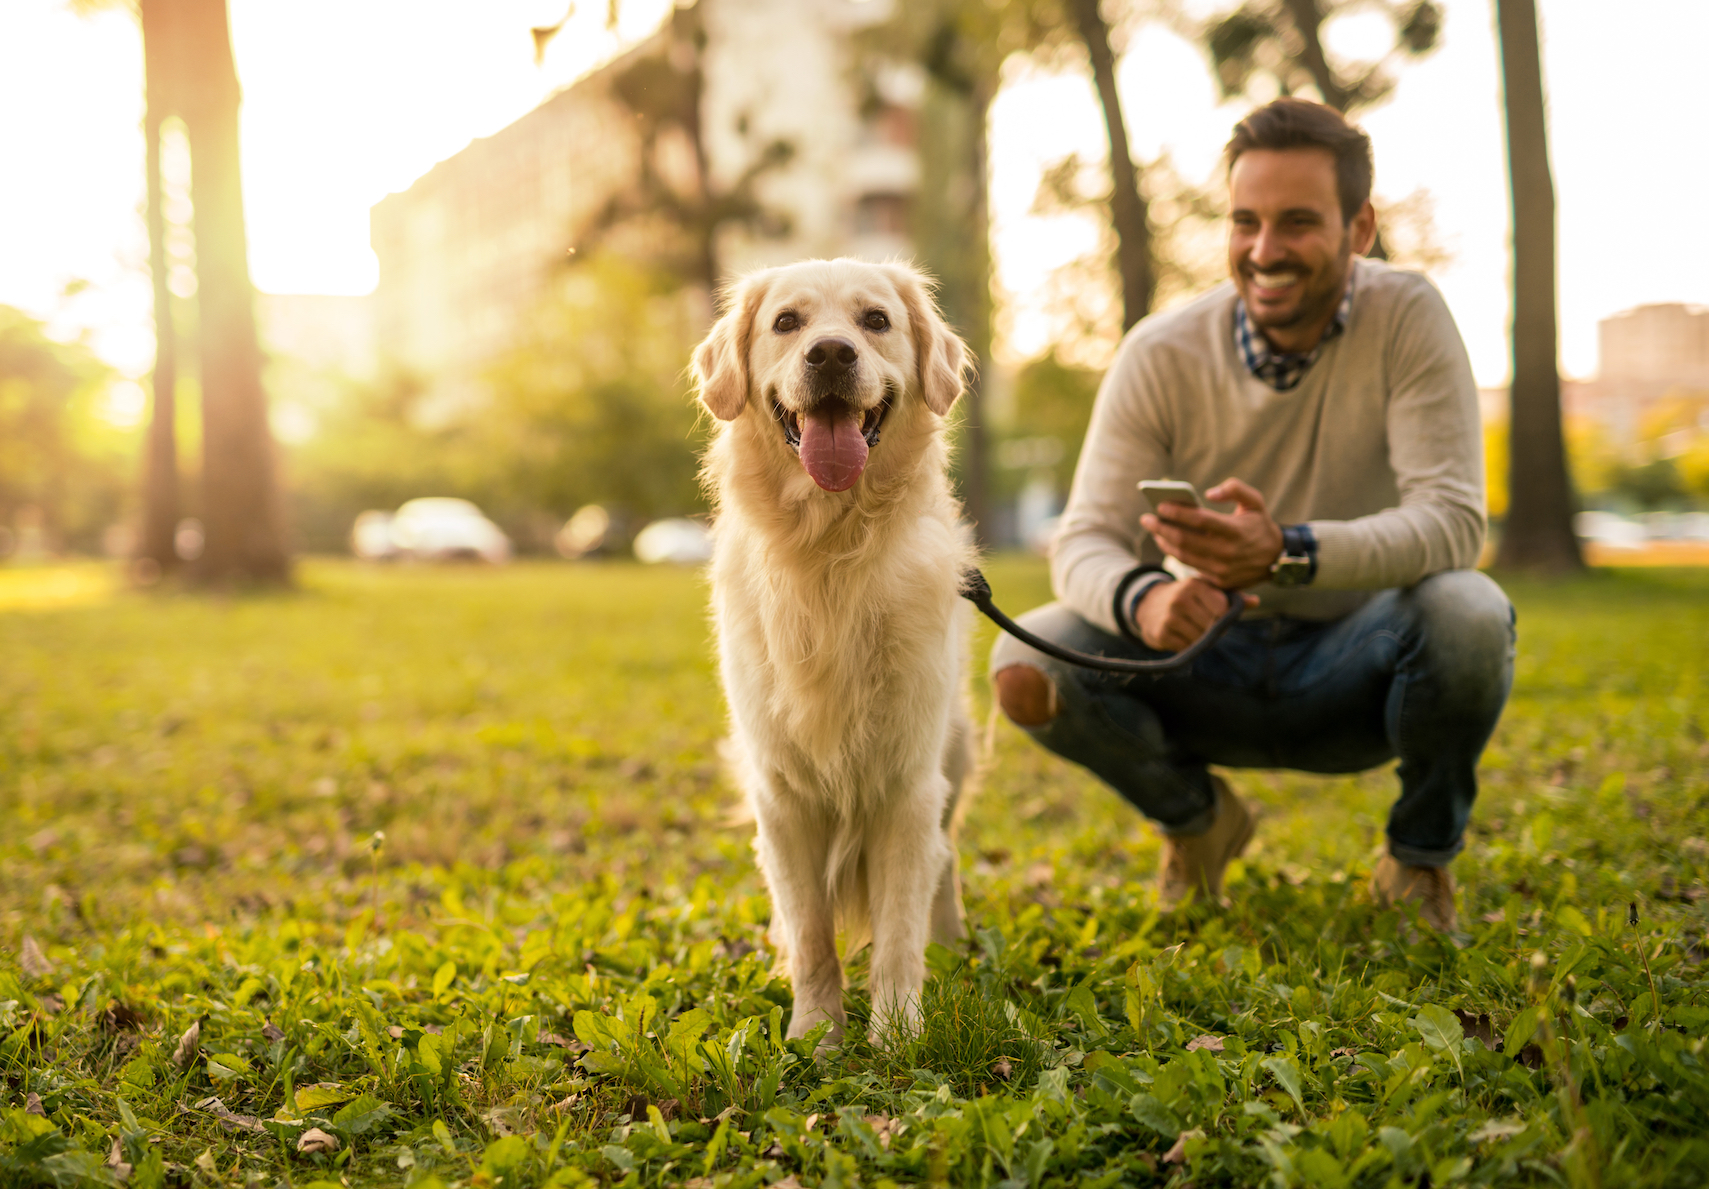 How to Choose the Right Pet for Your Lifestyle